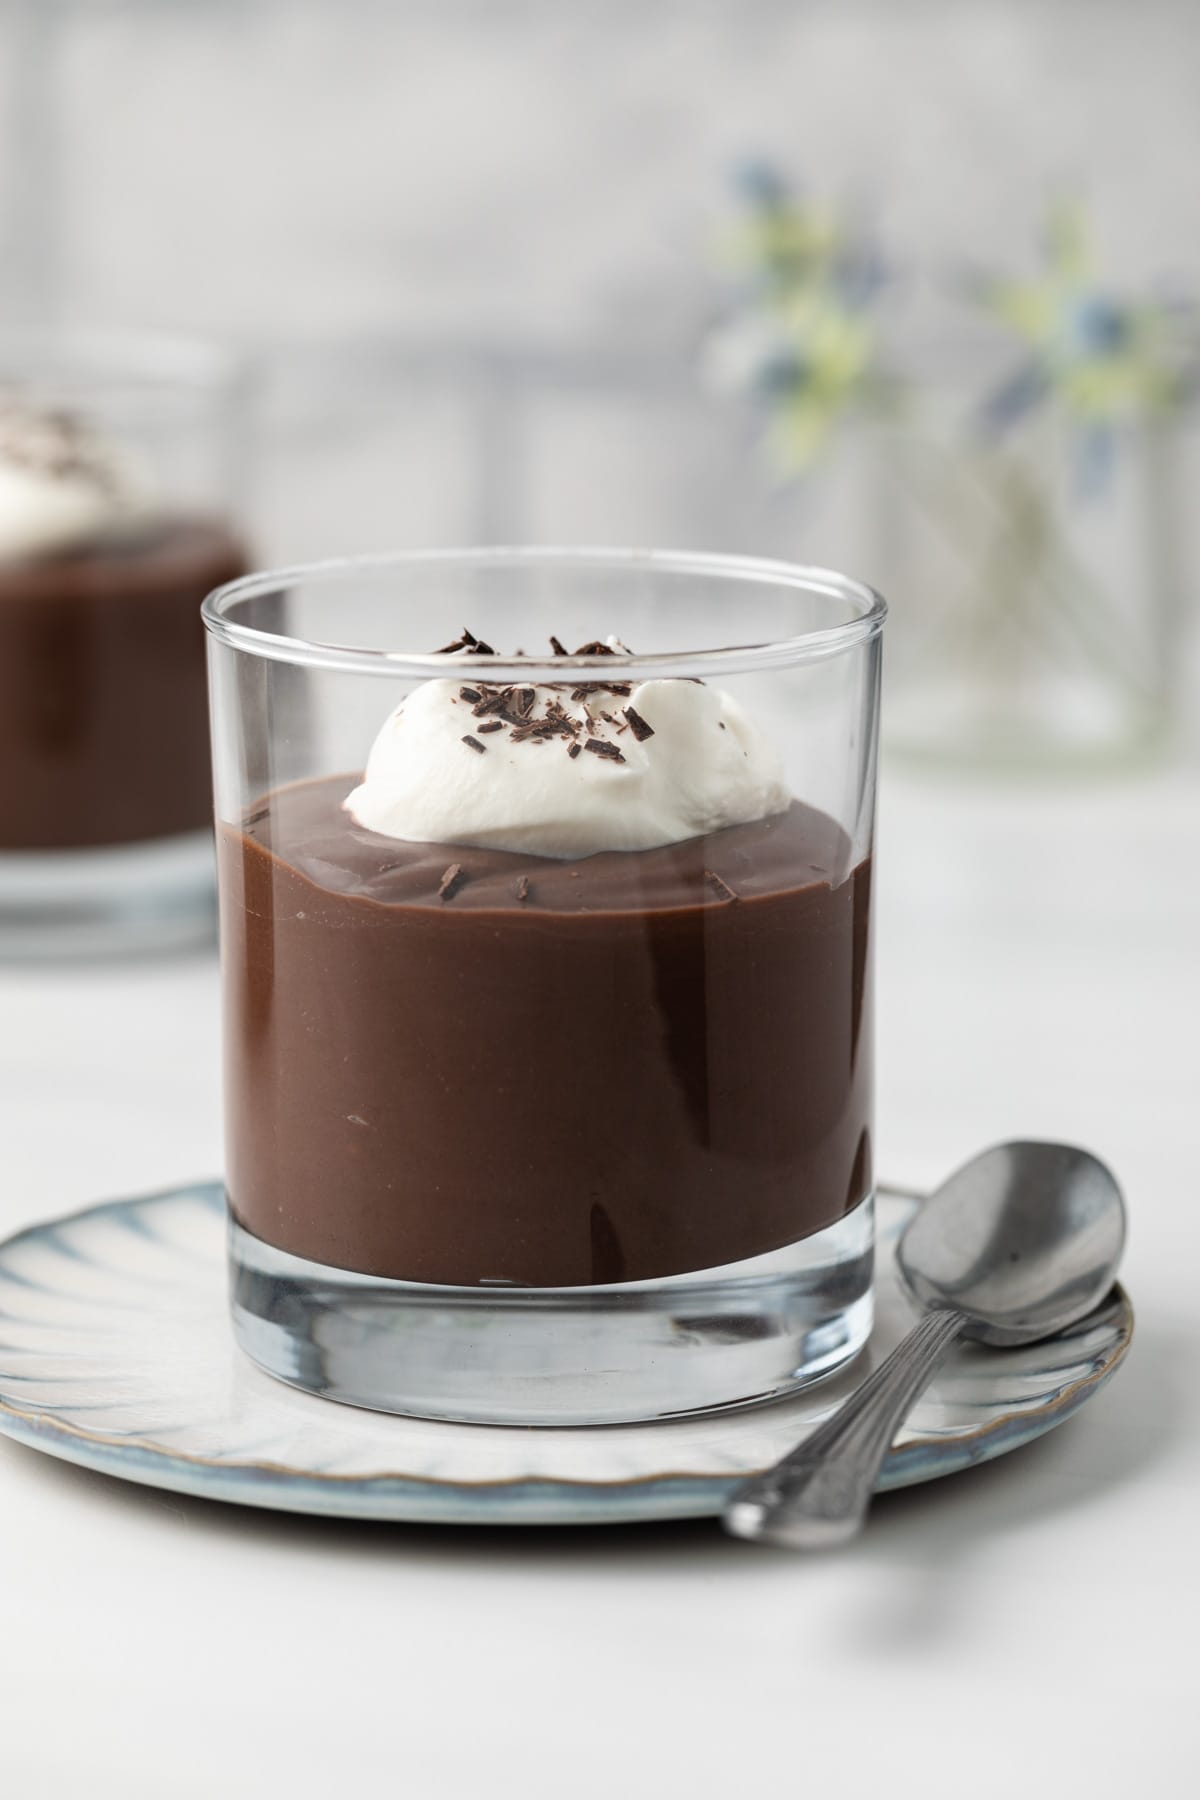 Chocolate pudding topped with whipped cream.